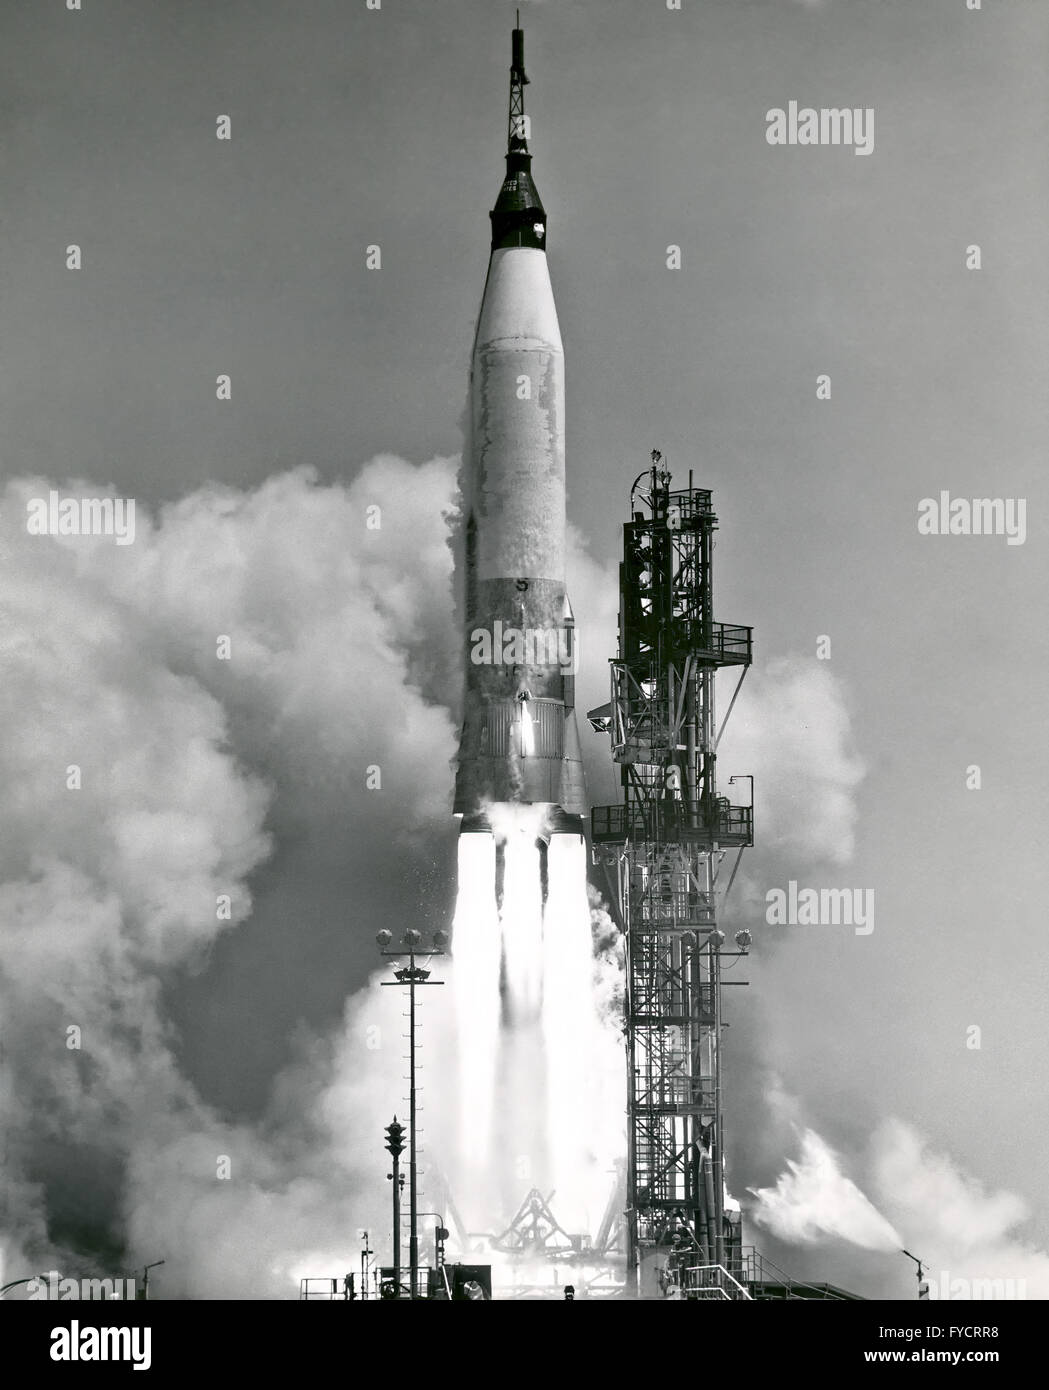 Test launch of the Mercury Atlas rocket blasts off from the Kennedy Space Center April 25, 196 in Cape Canaveral, Florida. The Mercury-Atlas vehicle was destroyed by Range Safety Officer about 40 seconds after liftoff as the test was successful. Stock Photo